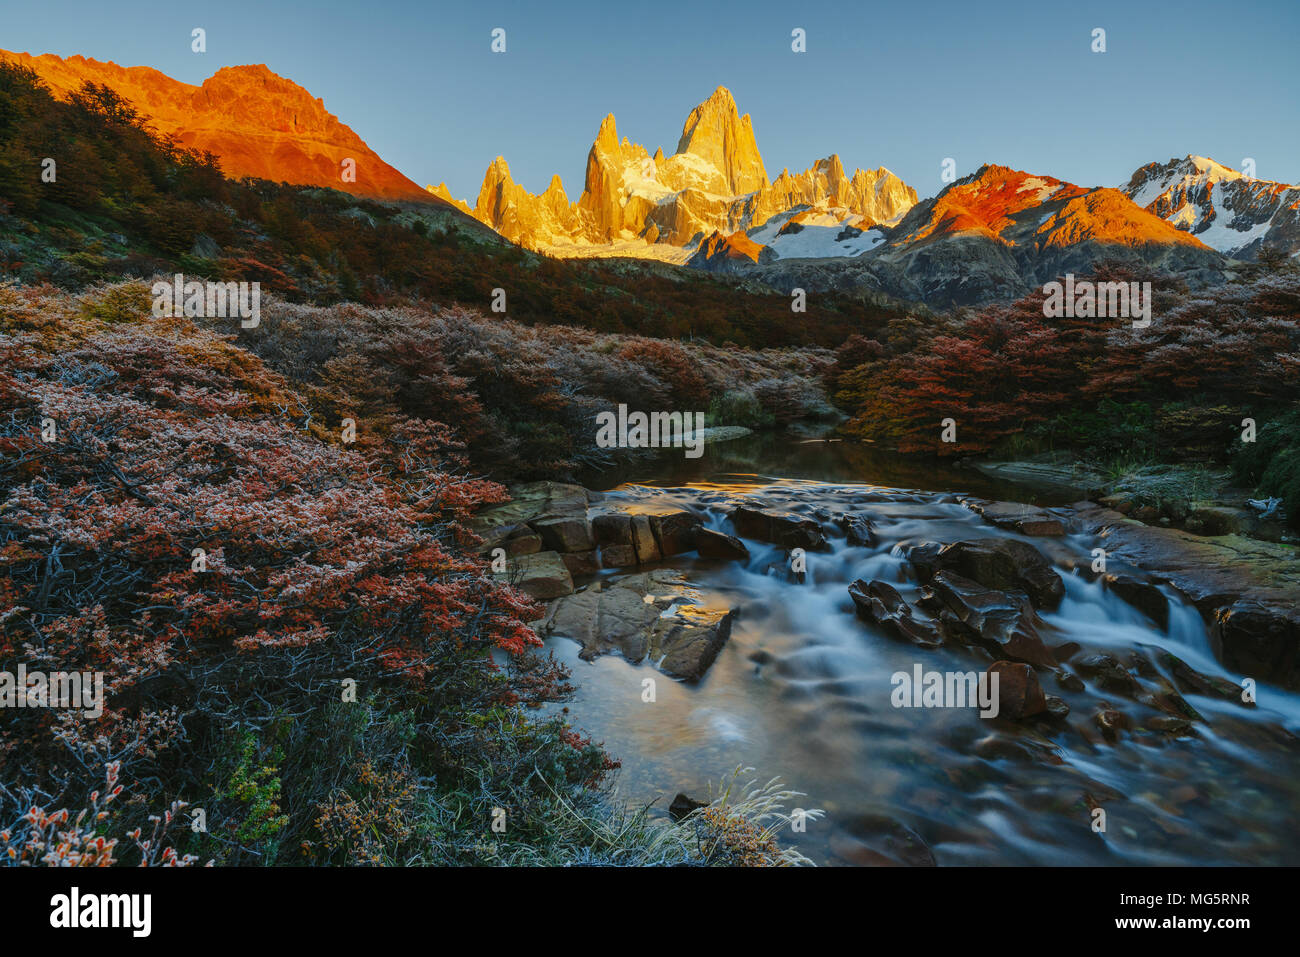 View of Mount Fitz Roy and the river in the National Park of Los Glaciares during sunrise. Autumn in Patagonia, the Argentine side Stock Photo